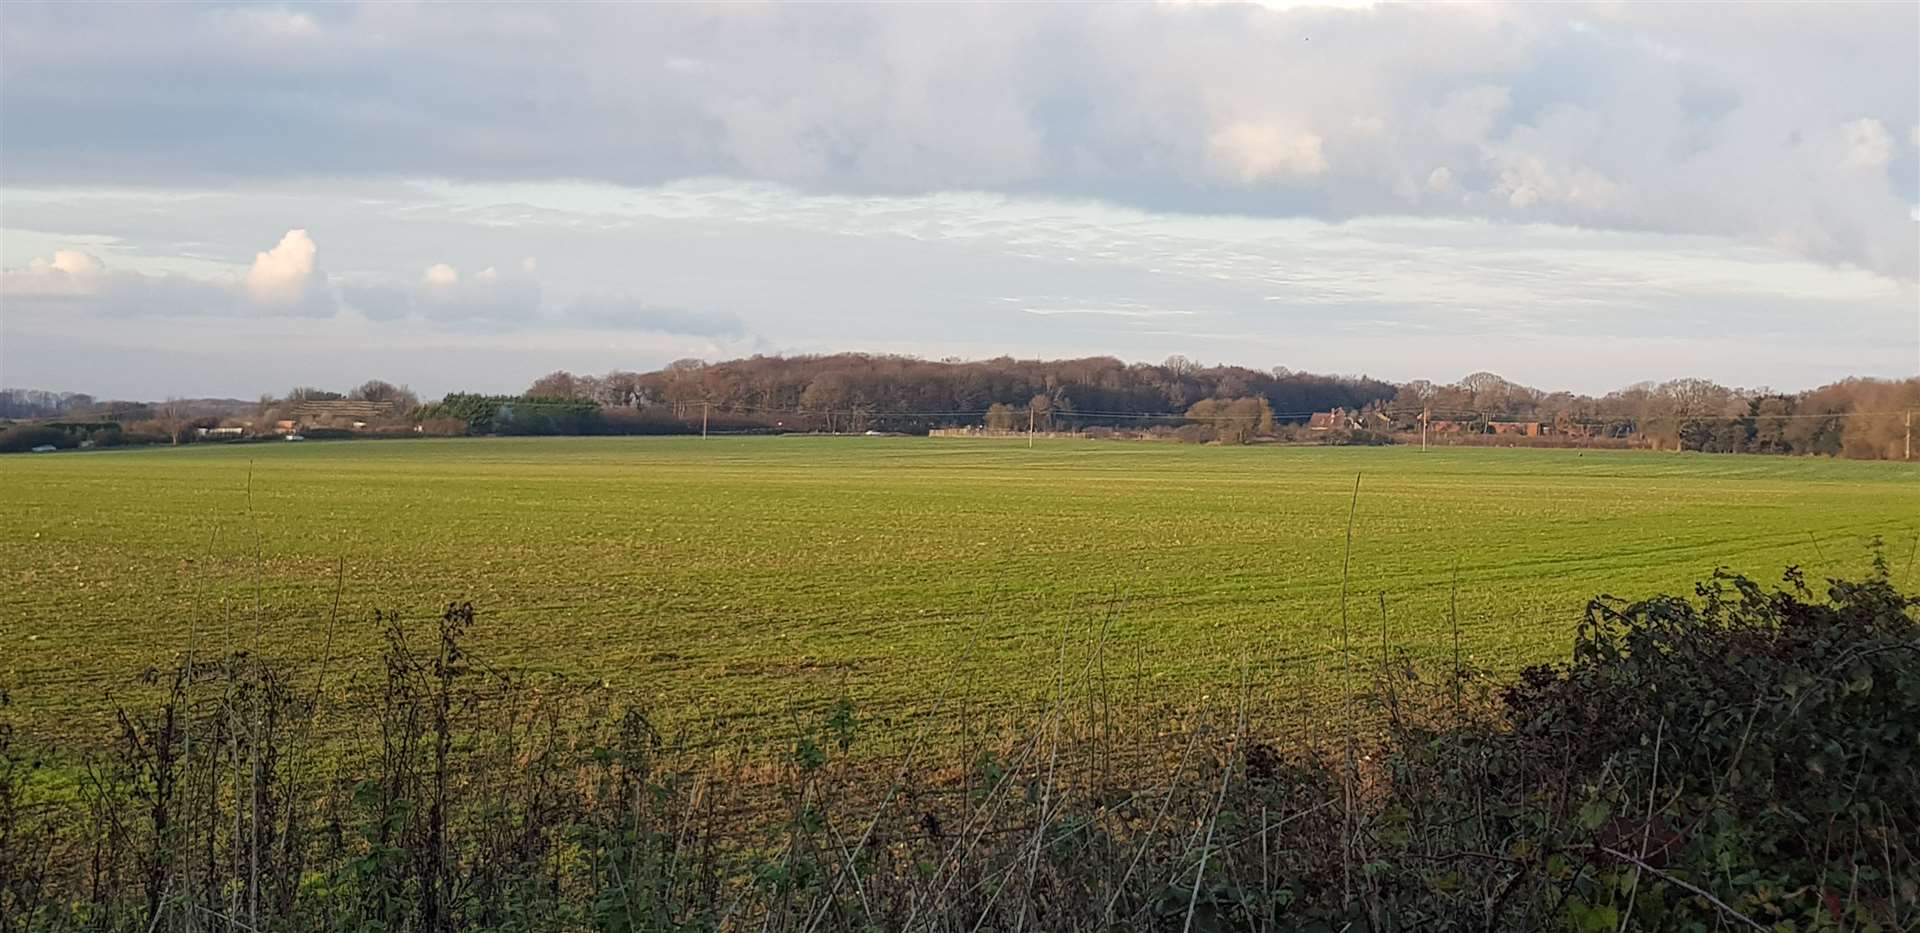 How the garden village site looks now: the view from Chapel Lane looking towards Hempstead